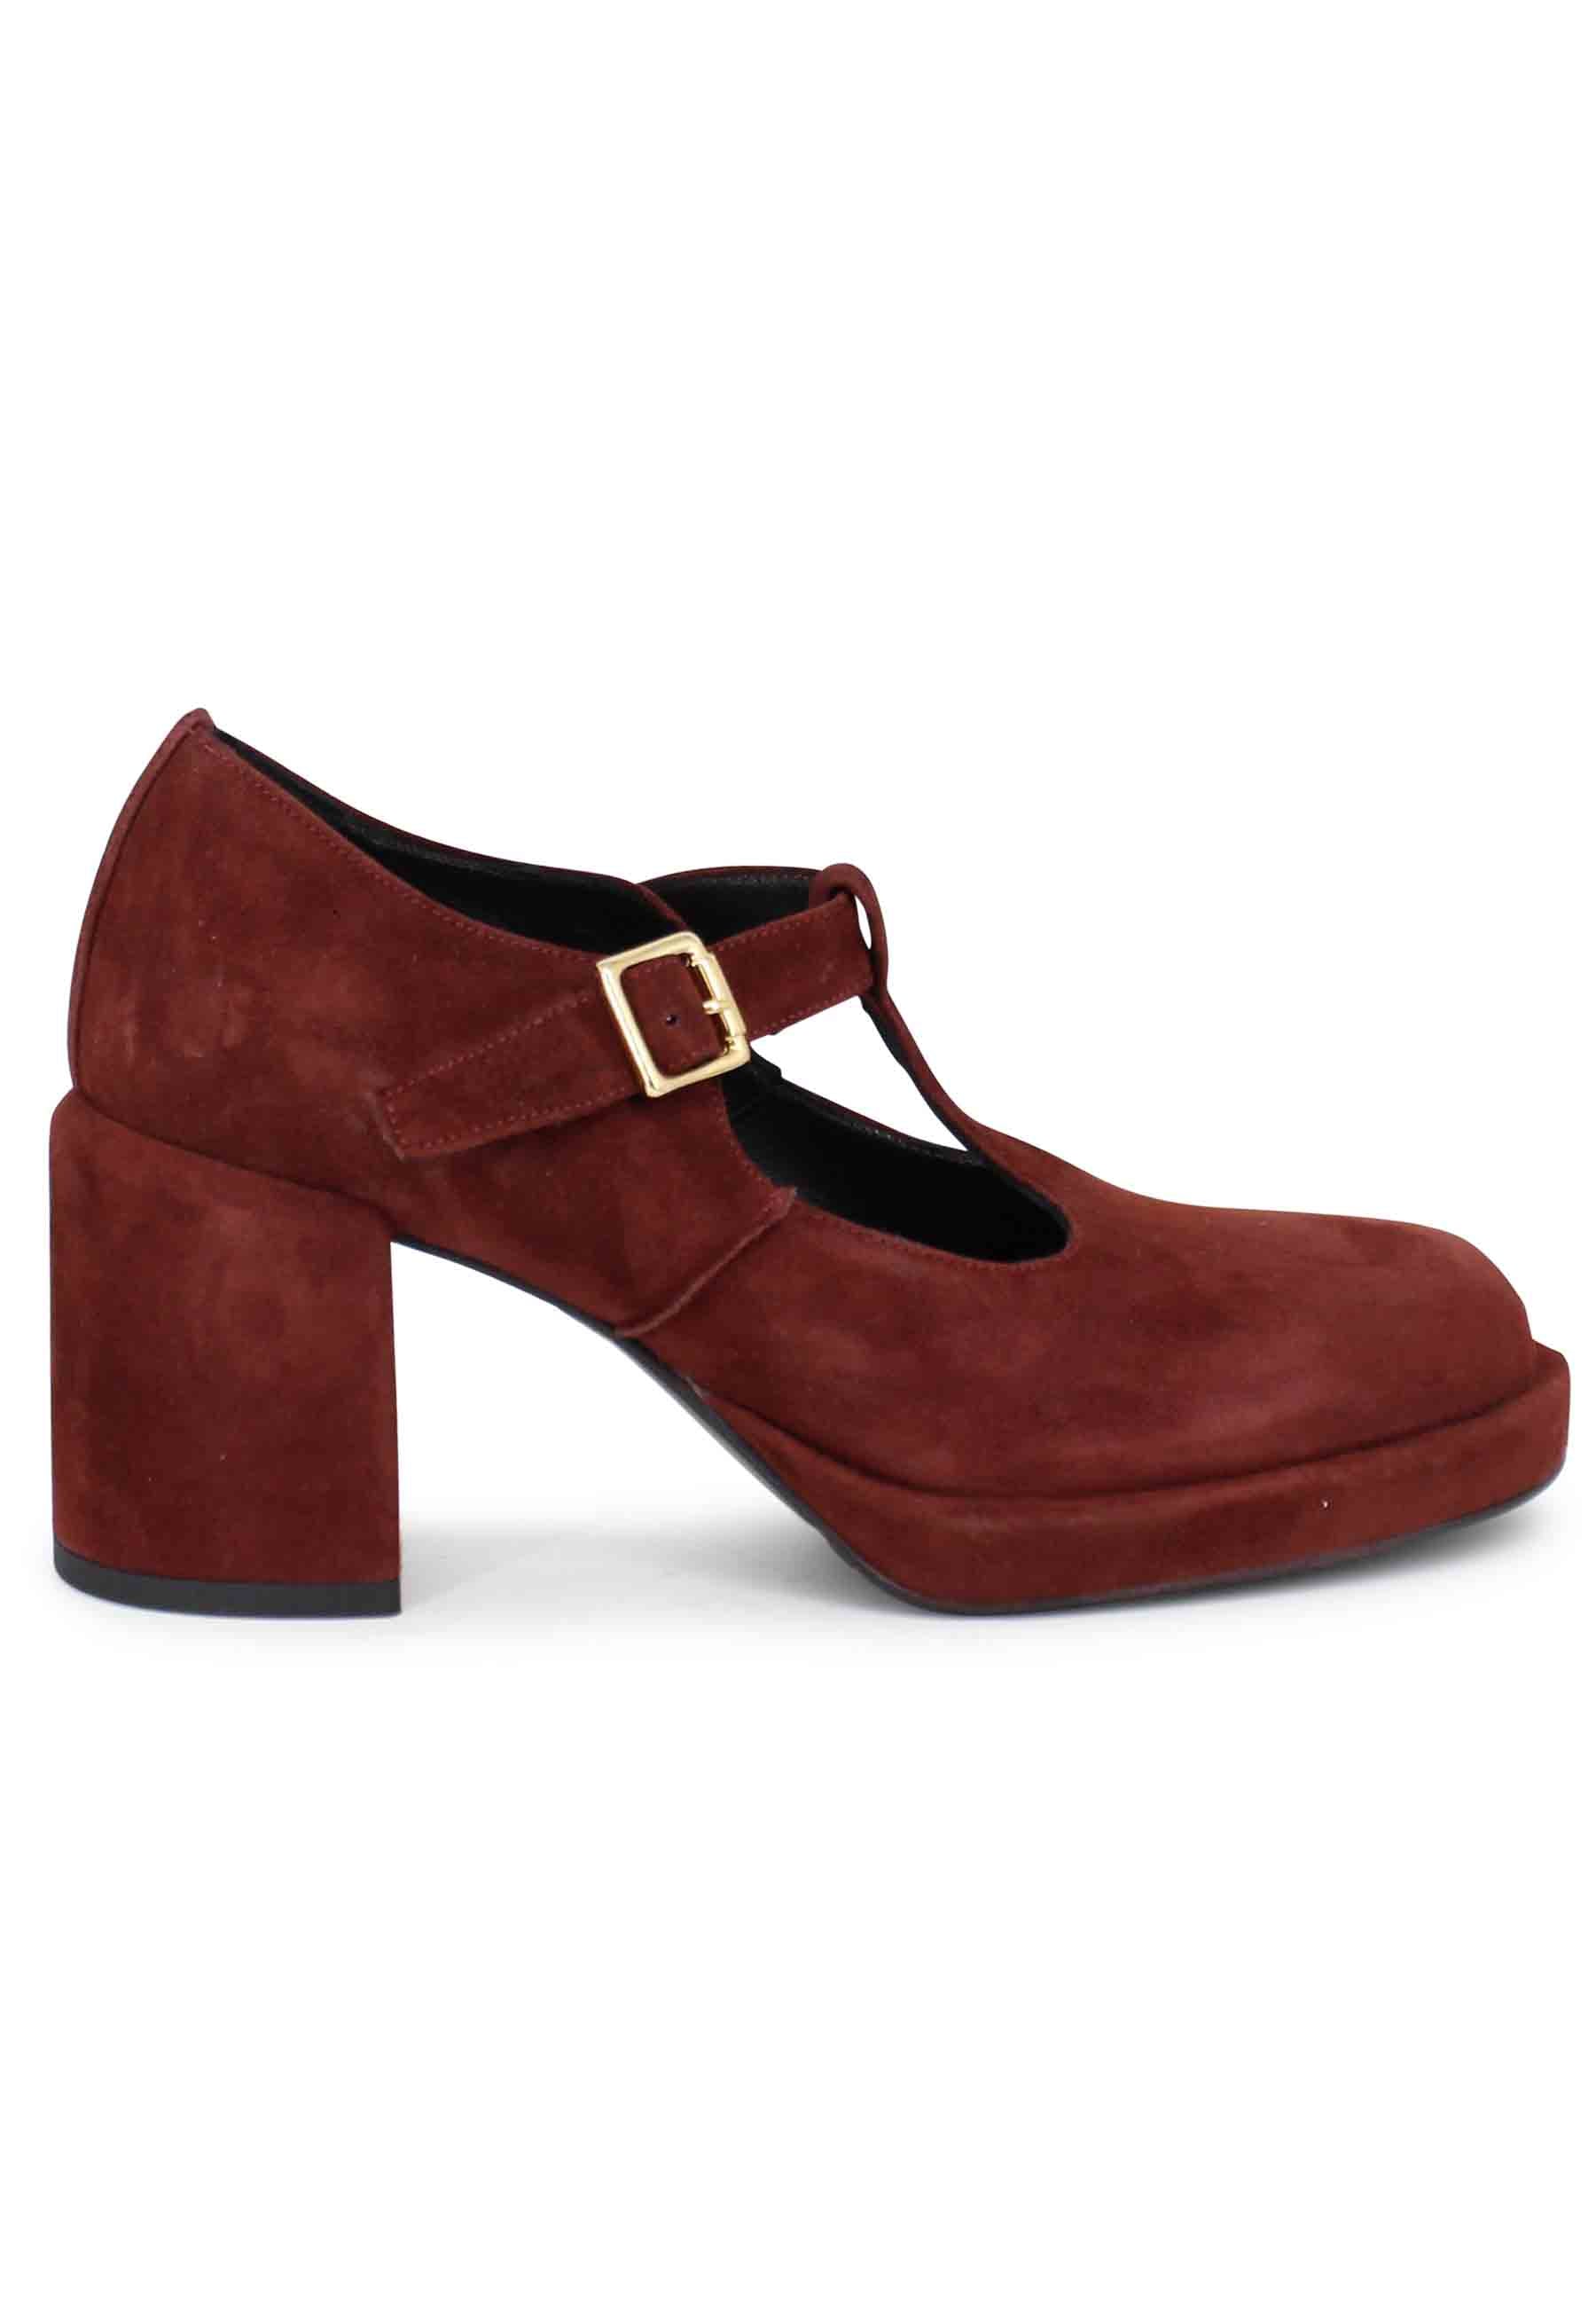 Women's decollete in brown suede with heel and plateau